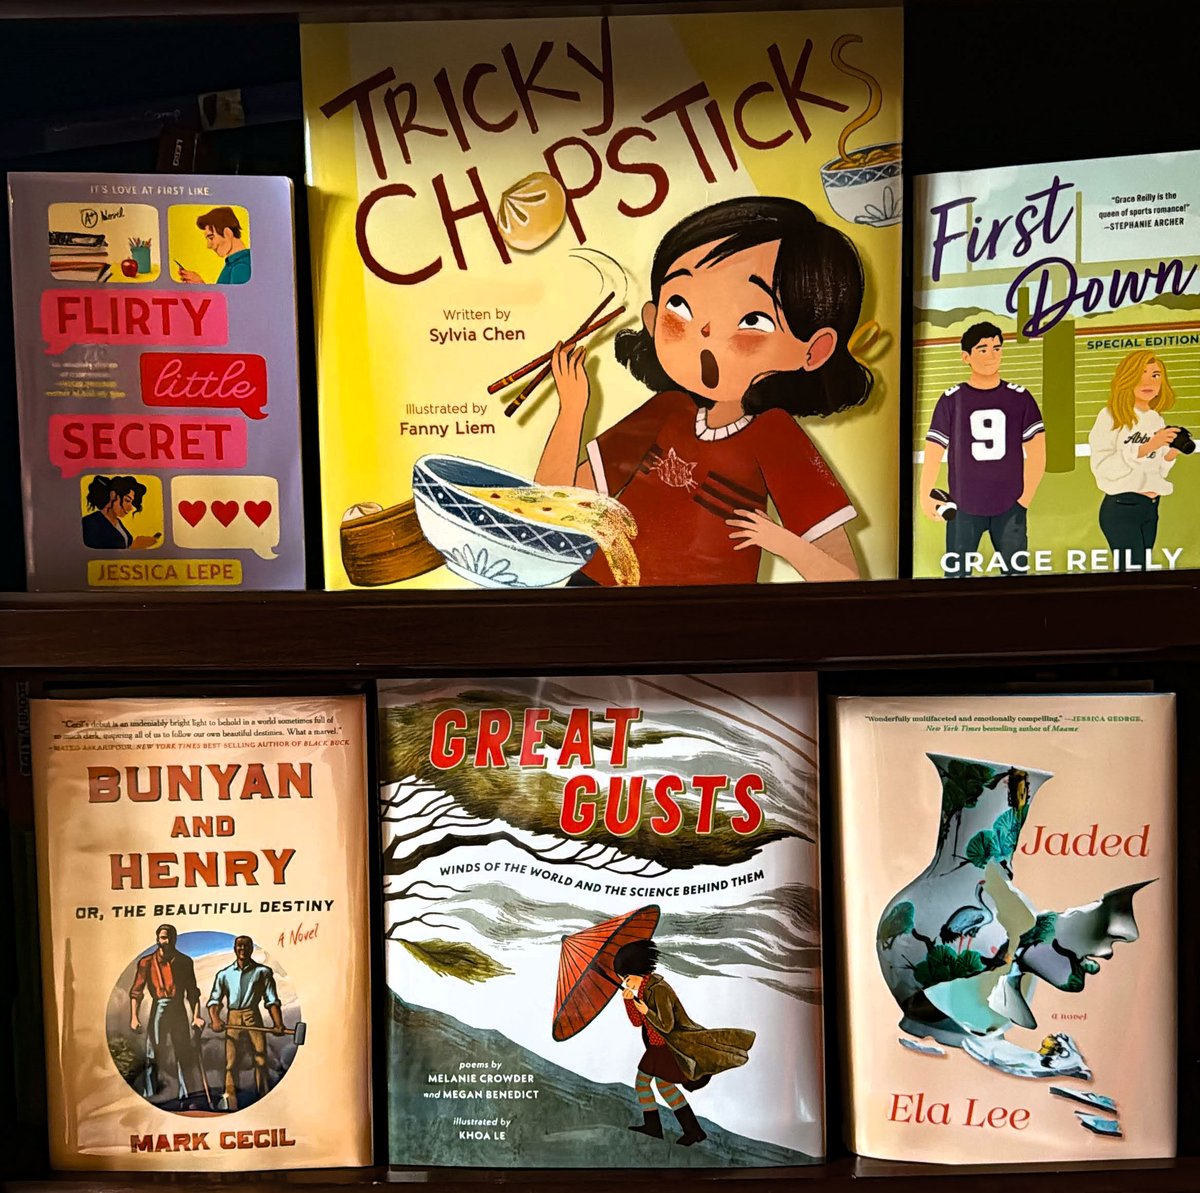 A tall bright #2024Debuts #shelfie today! I love seeing new picture books - Tricky Chopsticks was so cute and Great Gusts so beautiful! Titles and authors in thread.